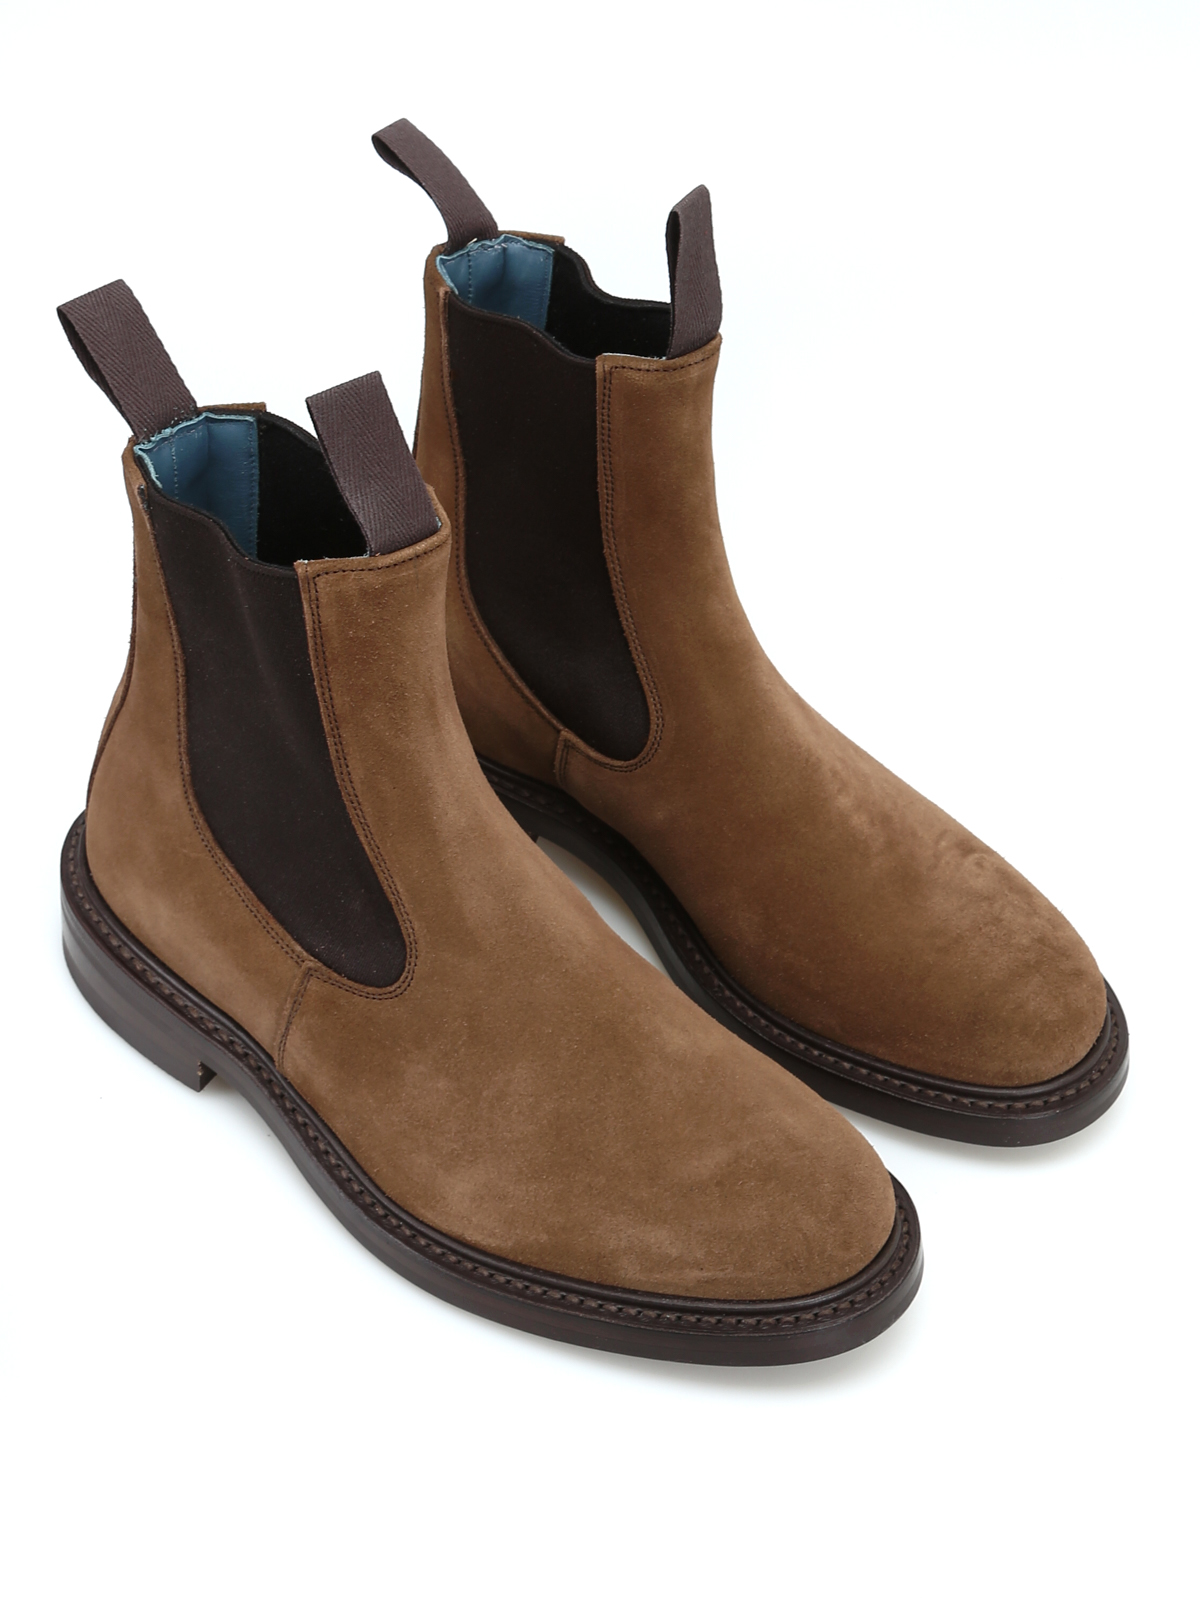 Ankle boots - Stephen Revival brown suede ankle boots - 76212STEPHENREVIVAL